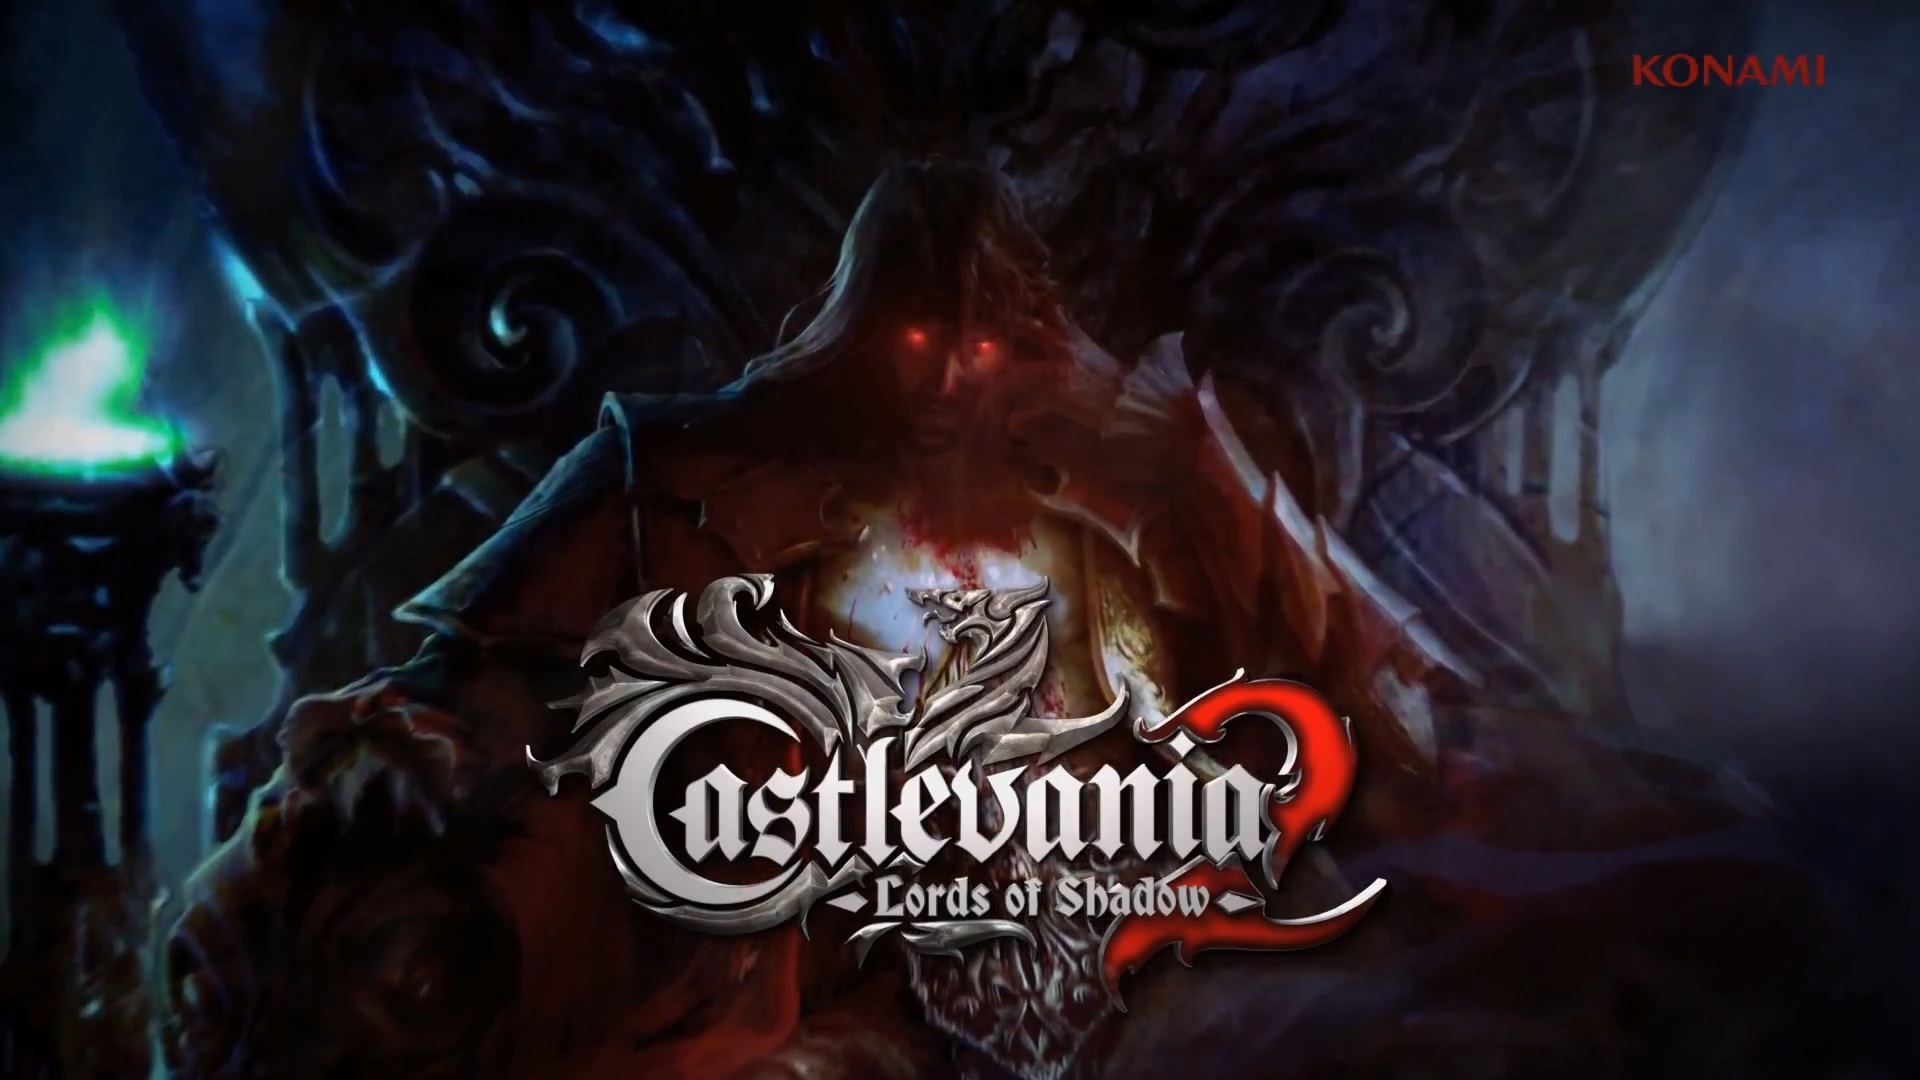 2012-VGA-Castlevania-Lords-of-Shadow-2-cinematic-trailer-rise-of-Dracul-Belmont